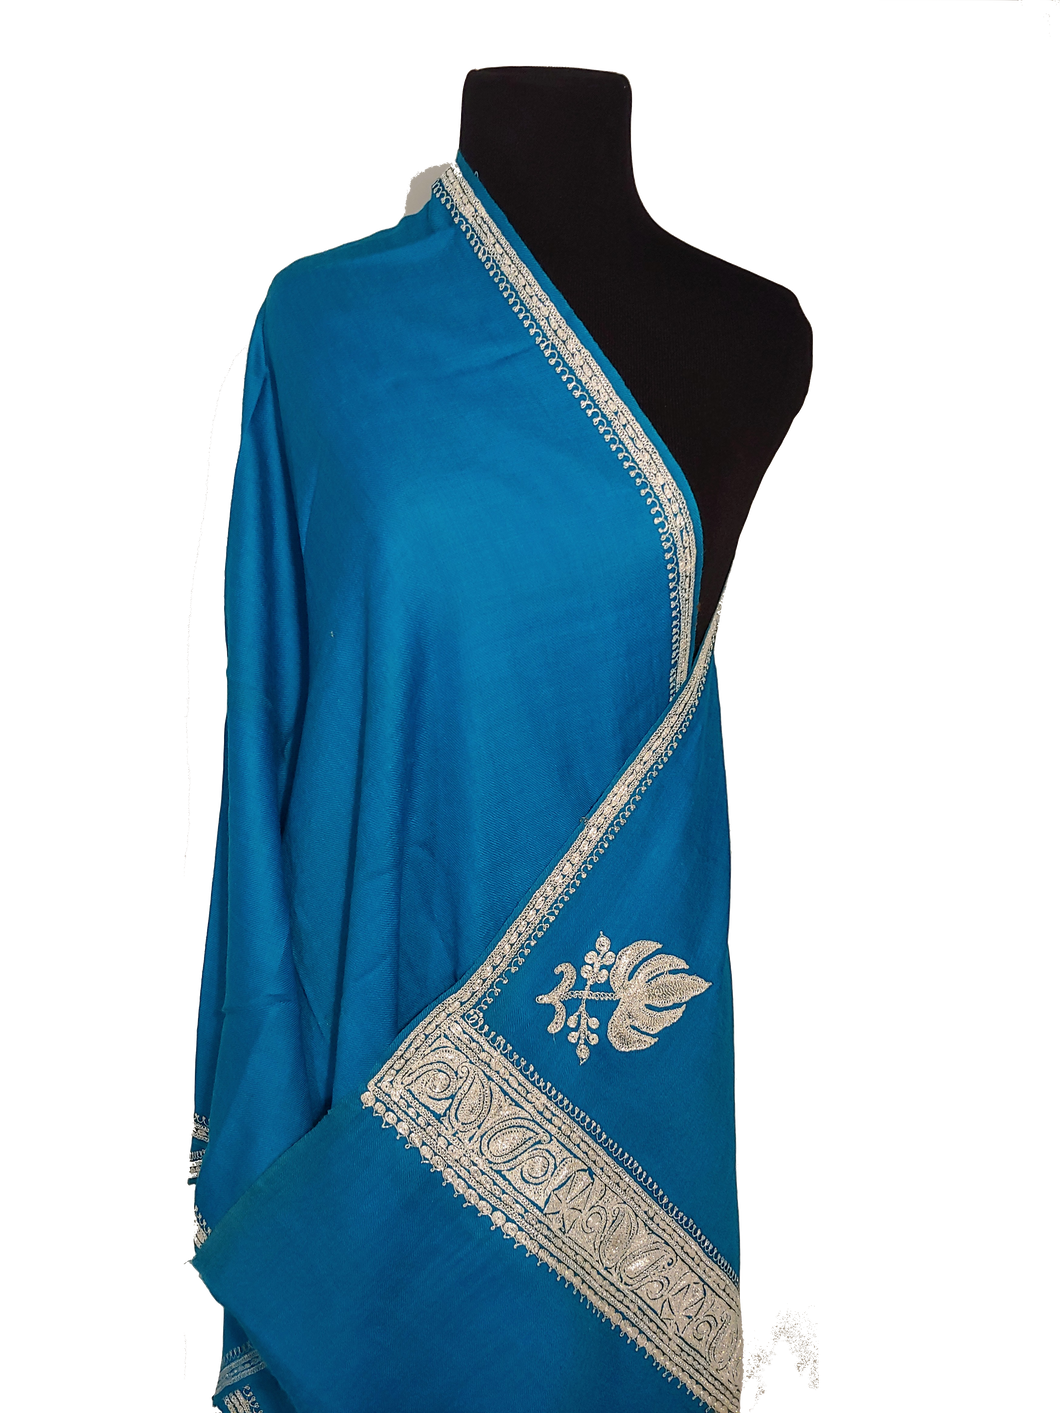 Awesome blue stole with kashmiri Tilla Embroidery